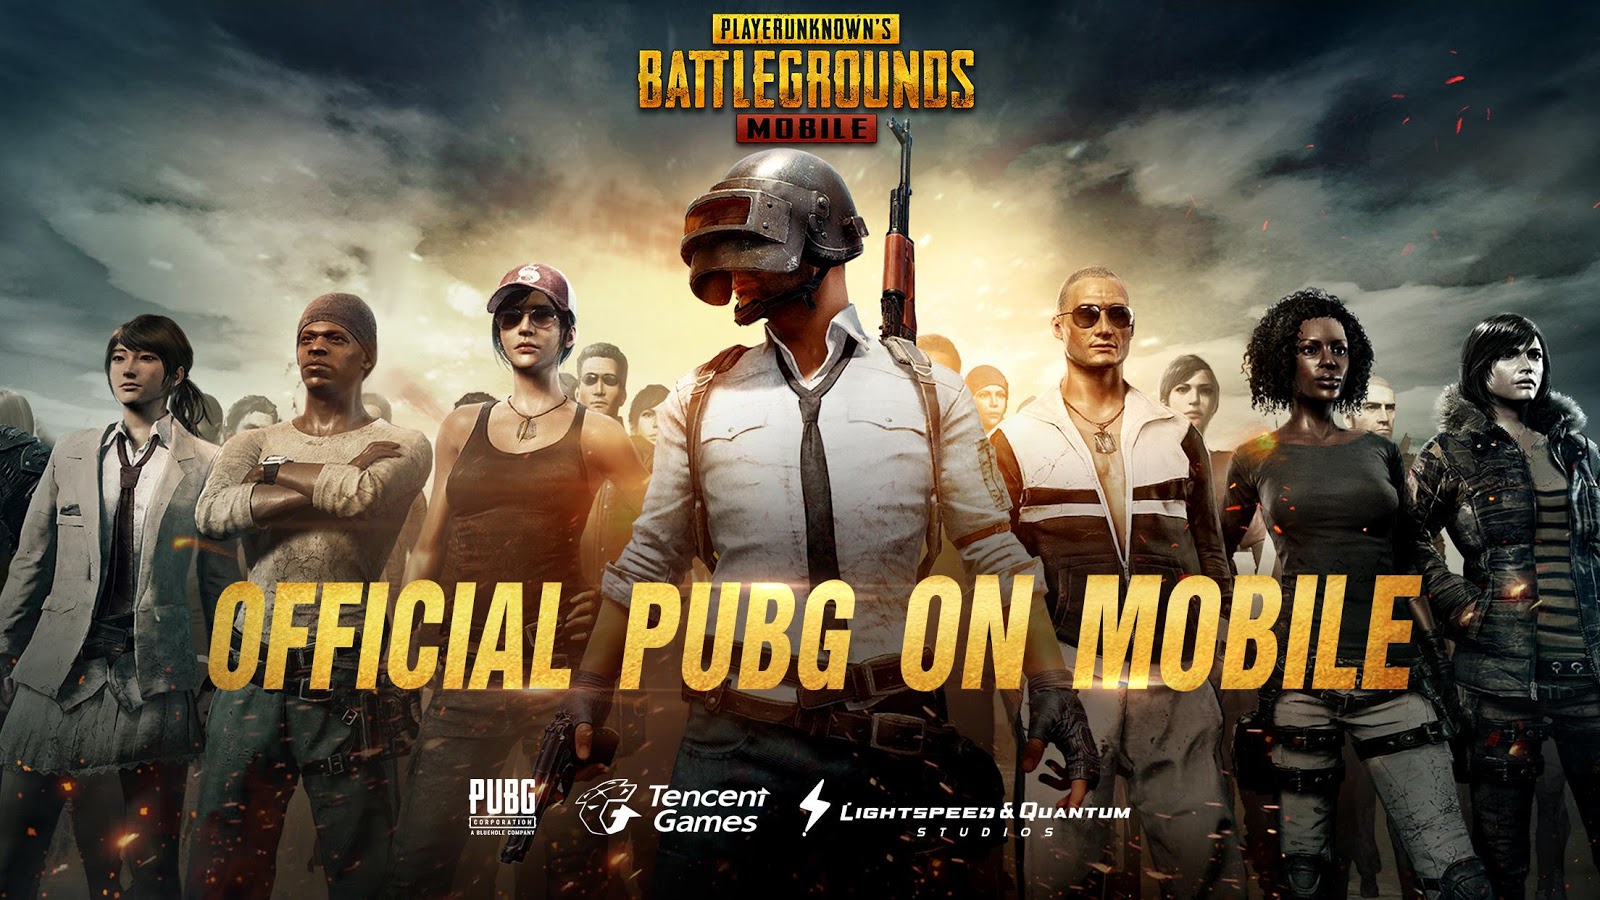 PUBG Mobile for PC Online - Free Download (Windows 7, 8, 8 ...